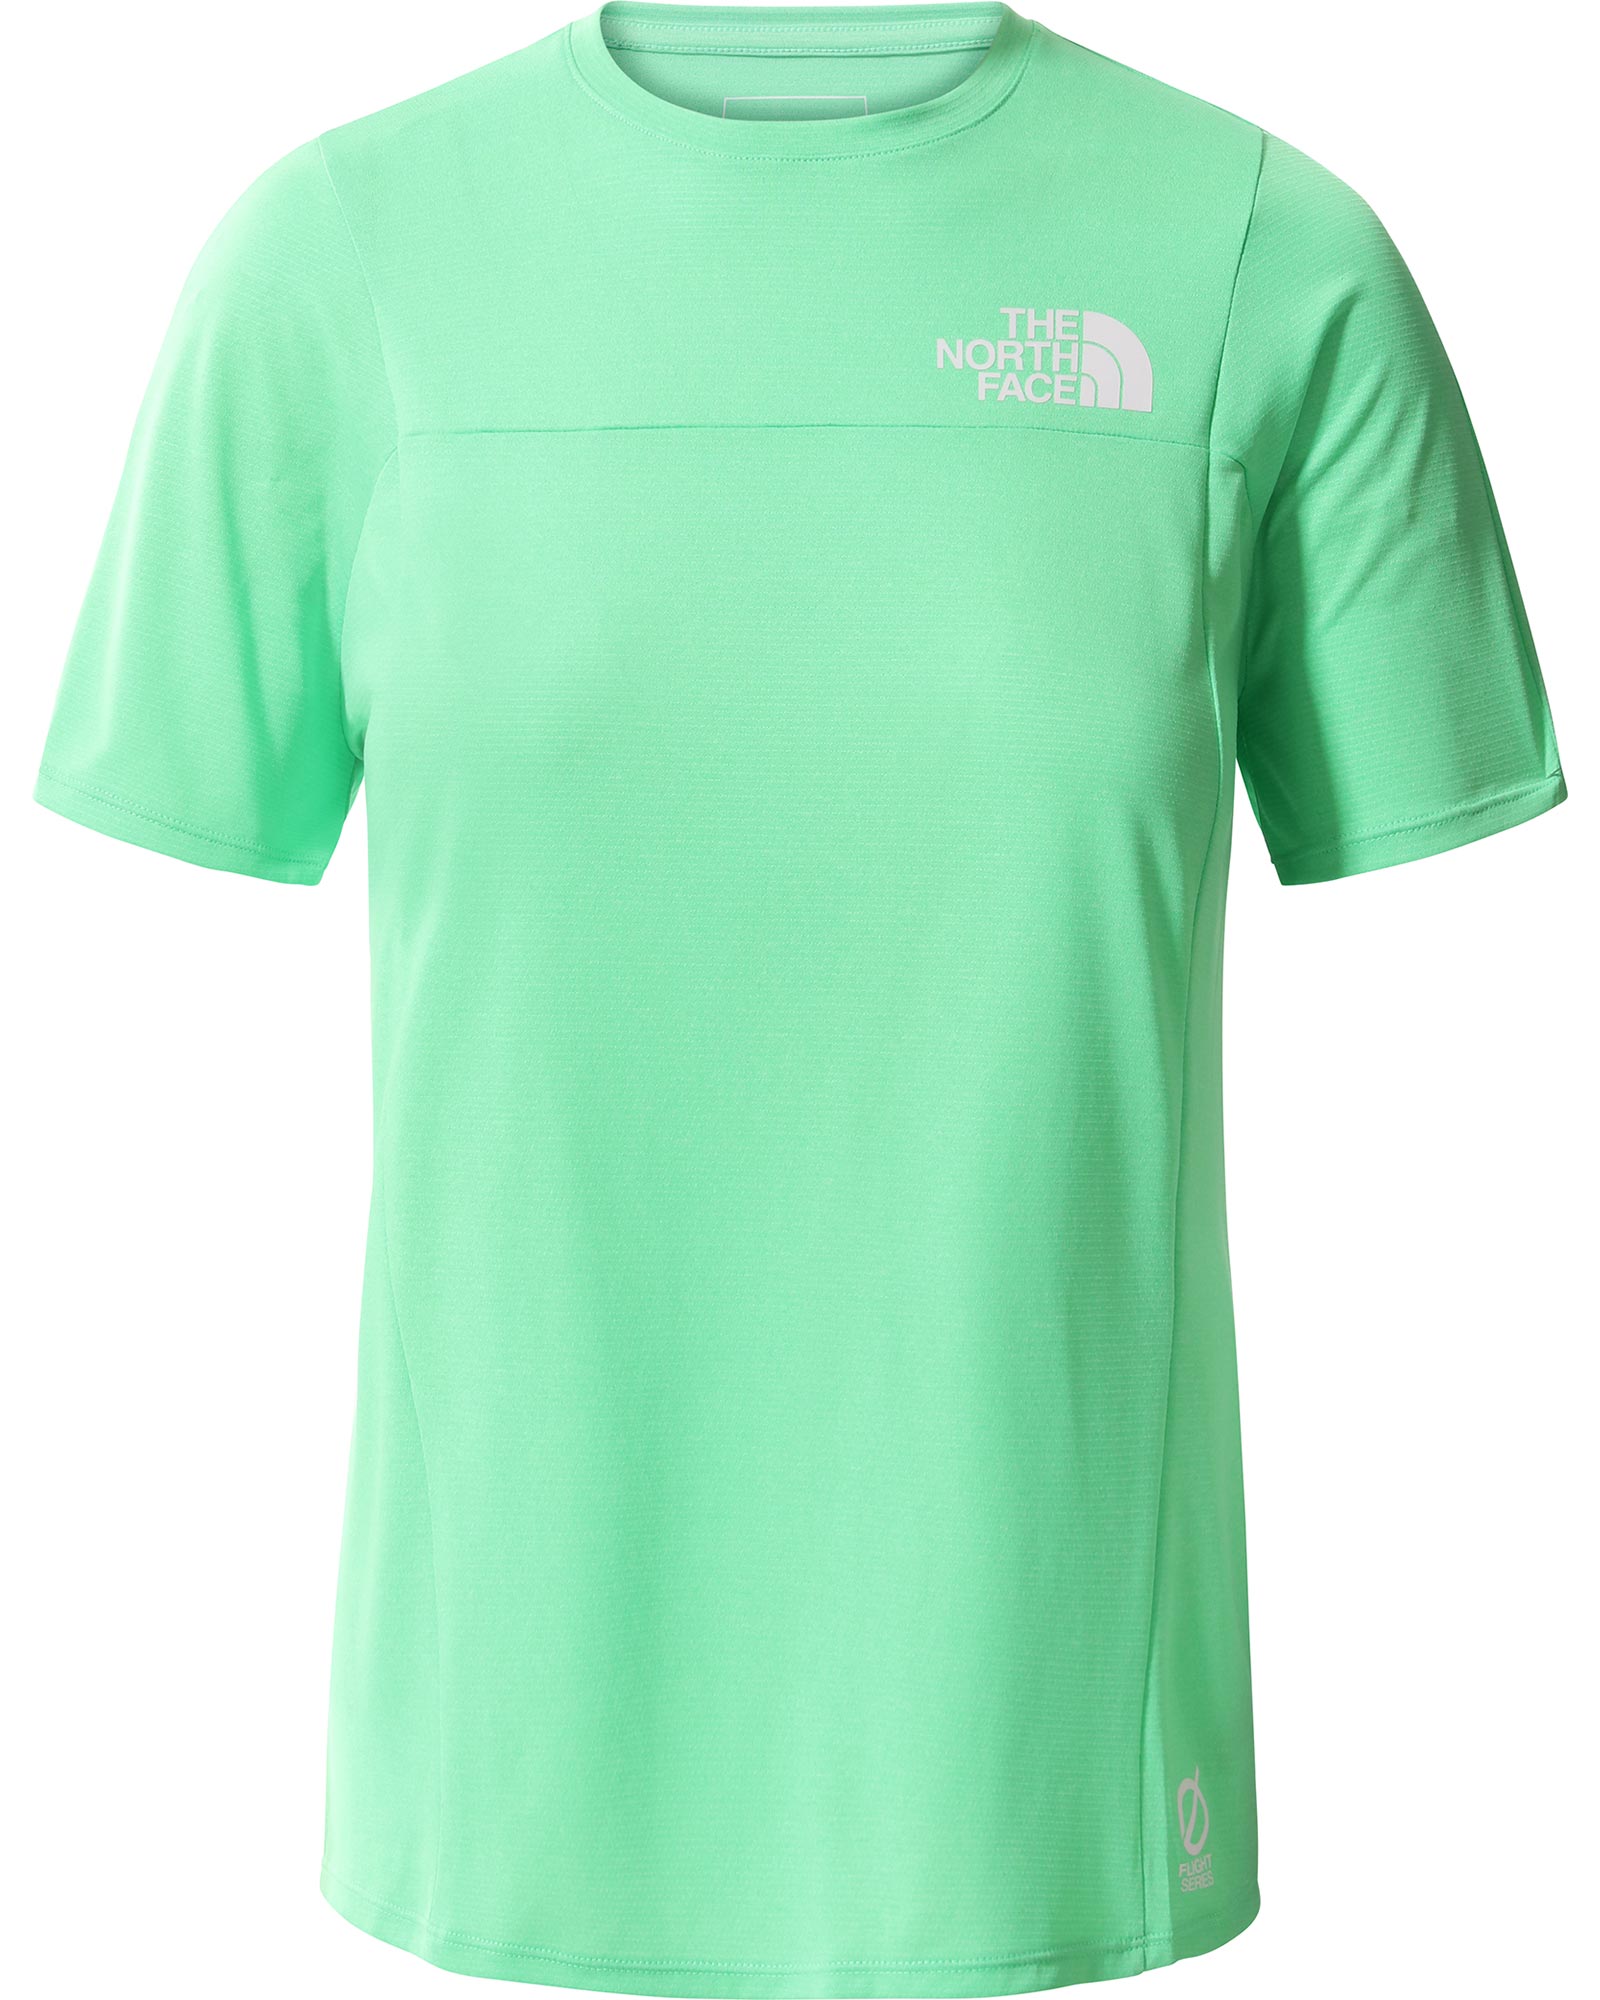 The North Face Flight Better Than Naked Women’s T Shirt - Chlorophyll Green L